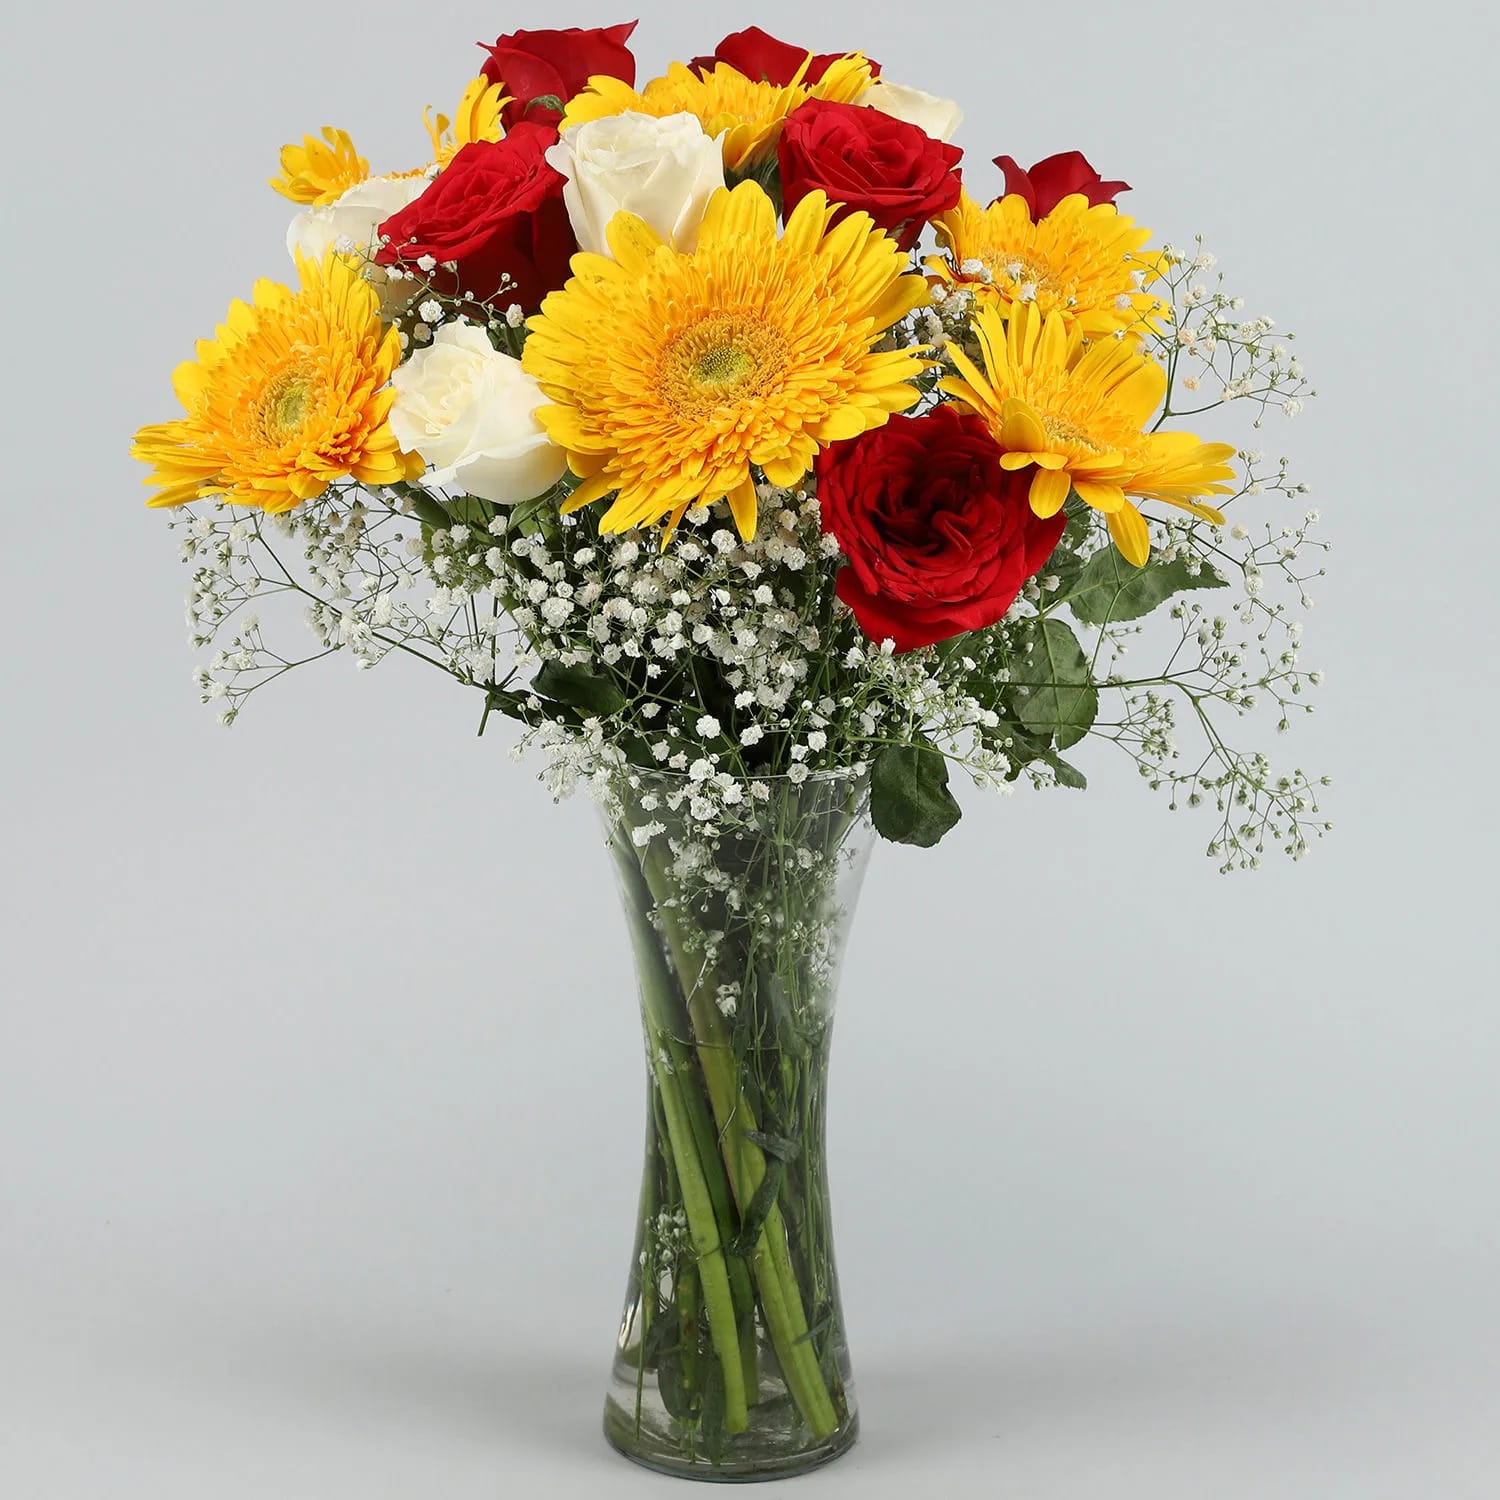 RADIANT FLOWERS IN A VASE